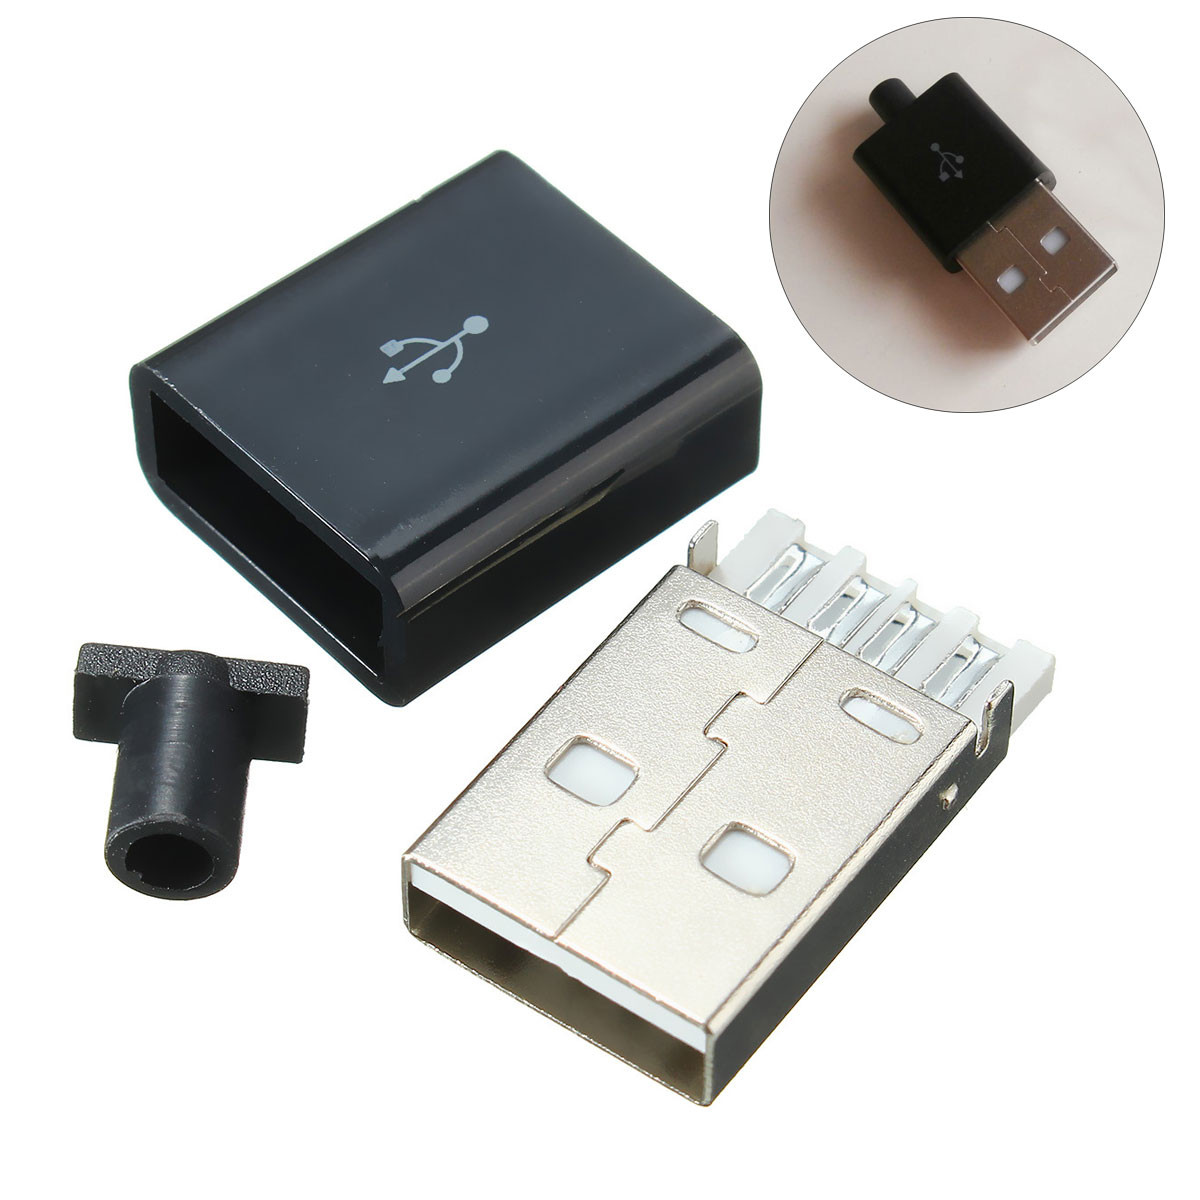 1Pcs-USB-20-Type-A-Plug-4-pin-Male-Adapter-Solder-Connector-amp-Black-Cover-Square-1287374